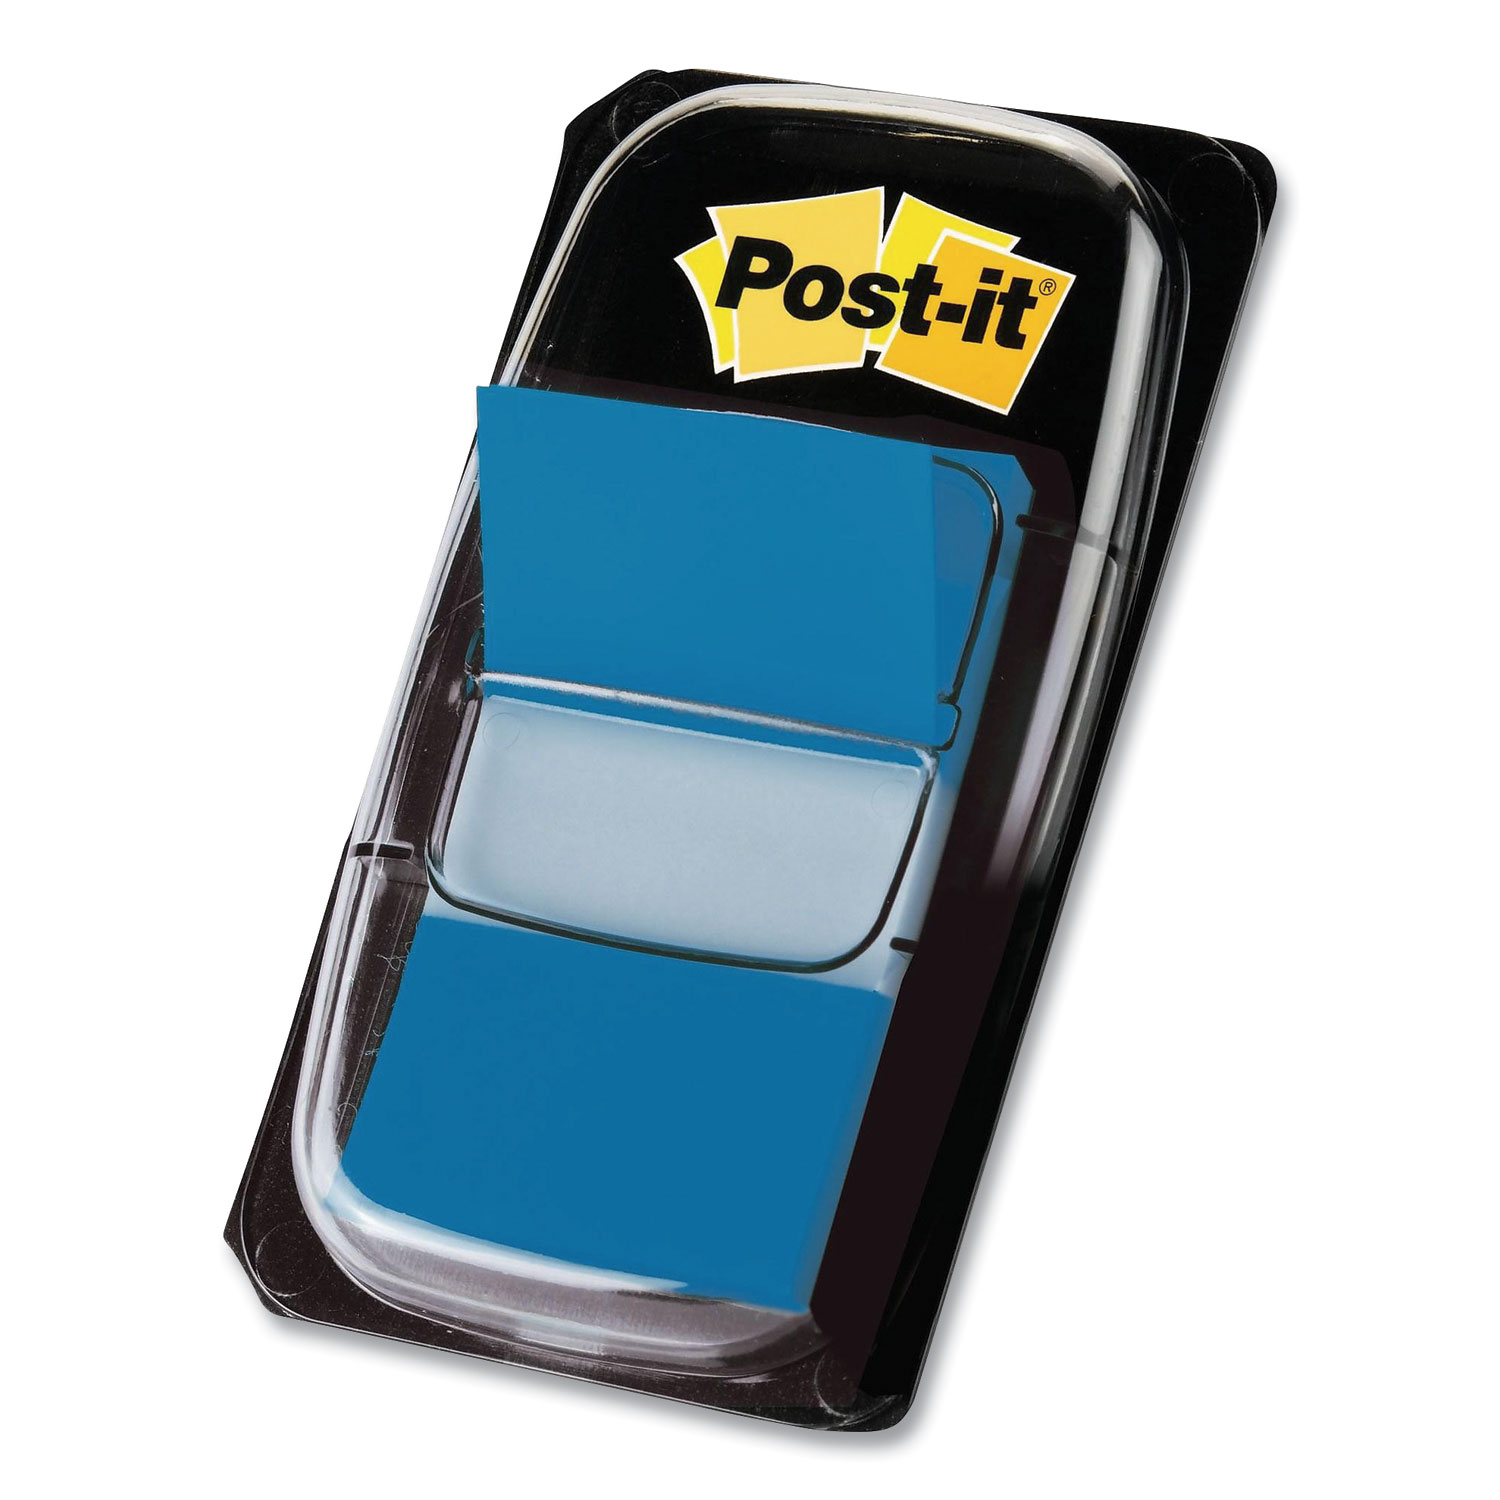  Post-it 680224 1 Flags Value Pack, Blue, 50 Flags/Dispenser, 24 Dispensers/Pack (MMM689374) 